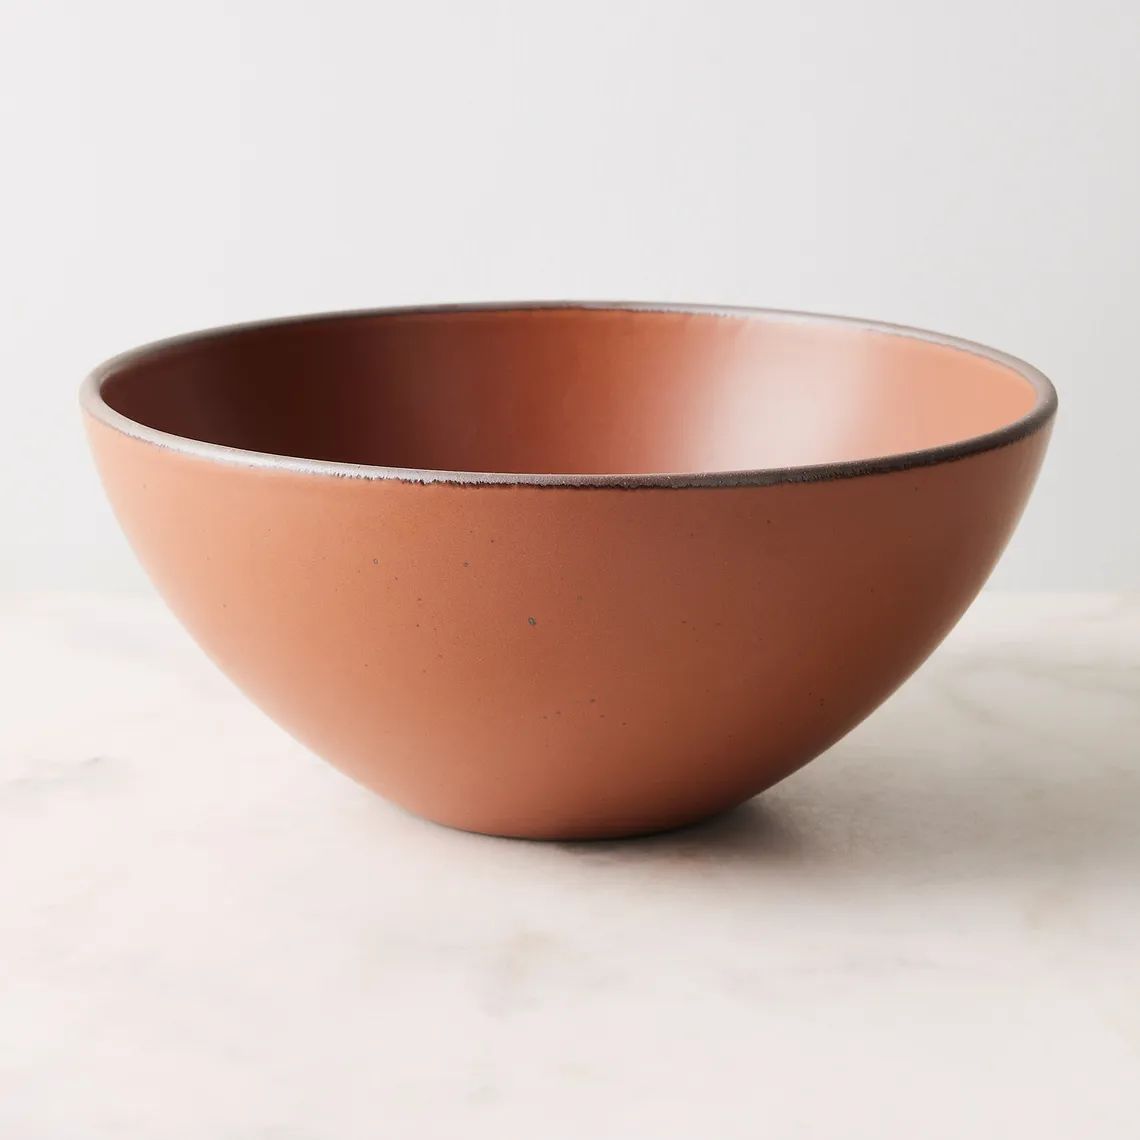 East Fork Pottery Mixing Bowl | Food52